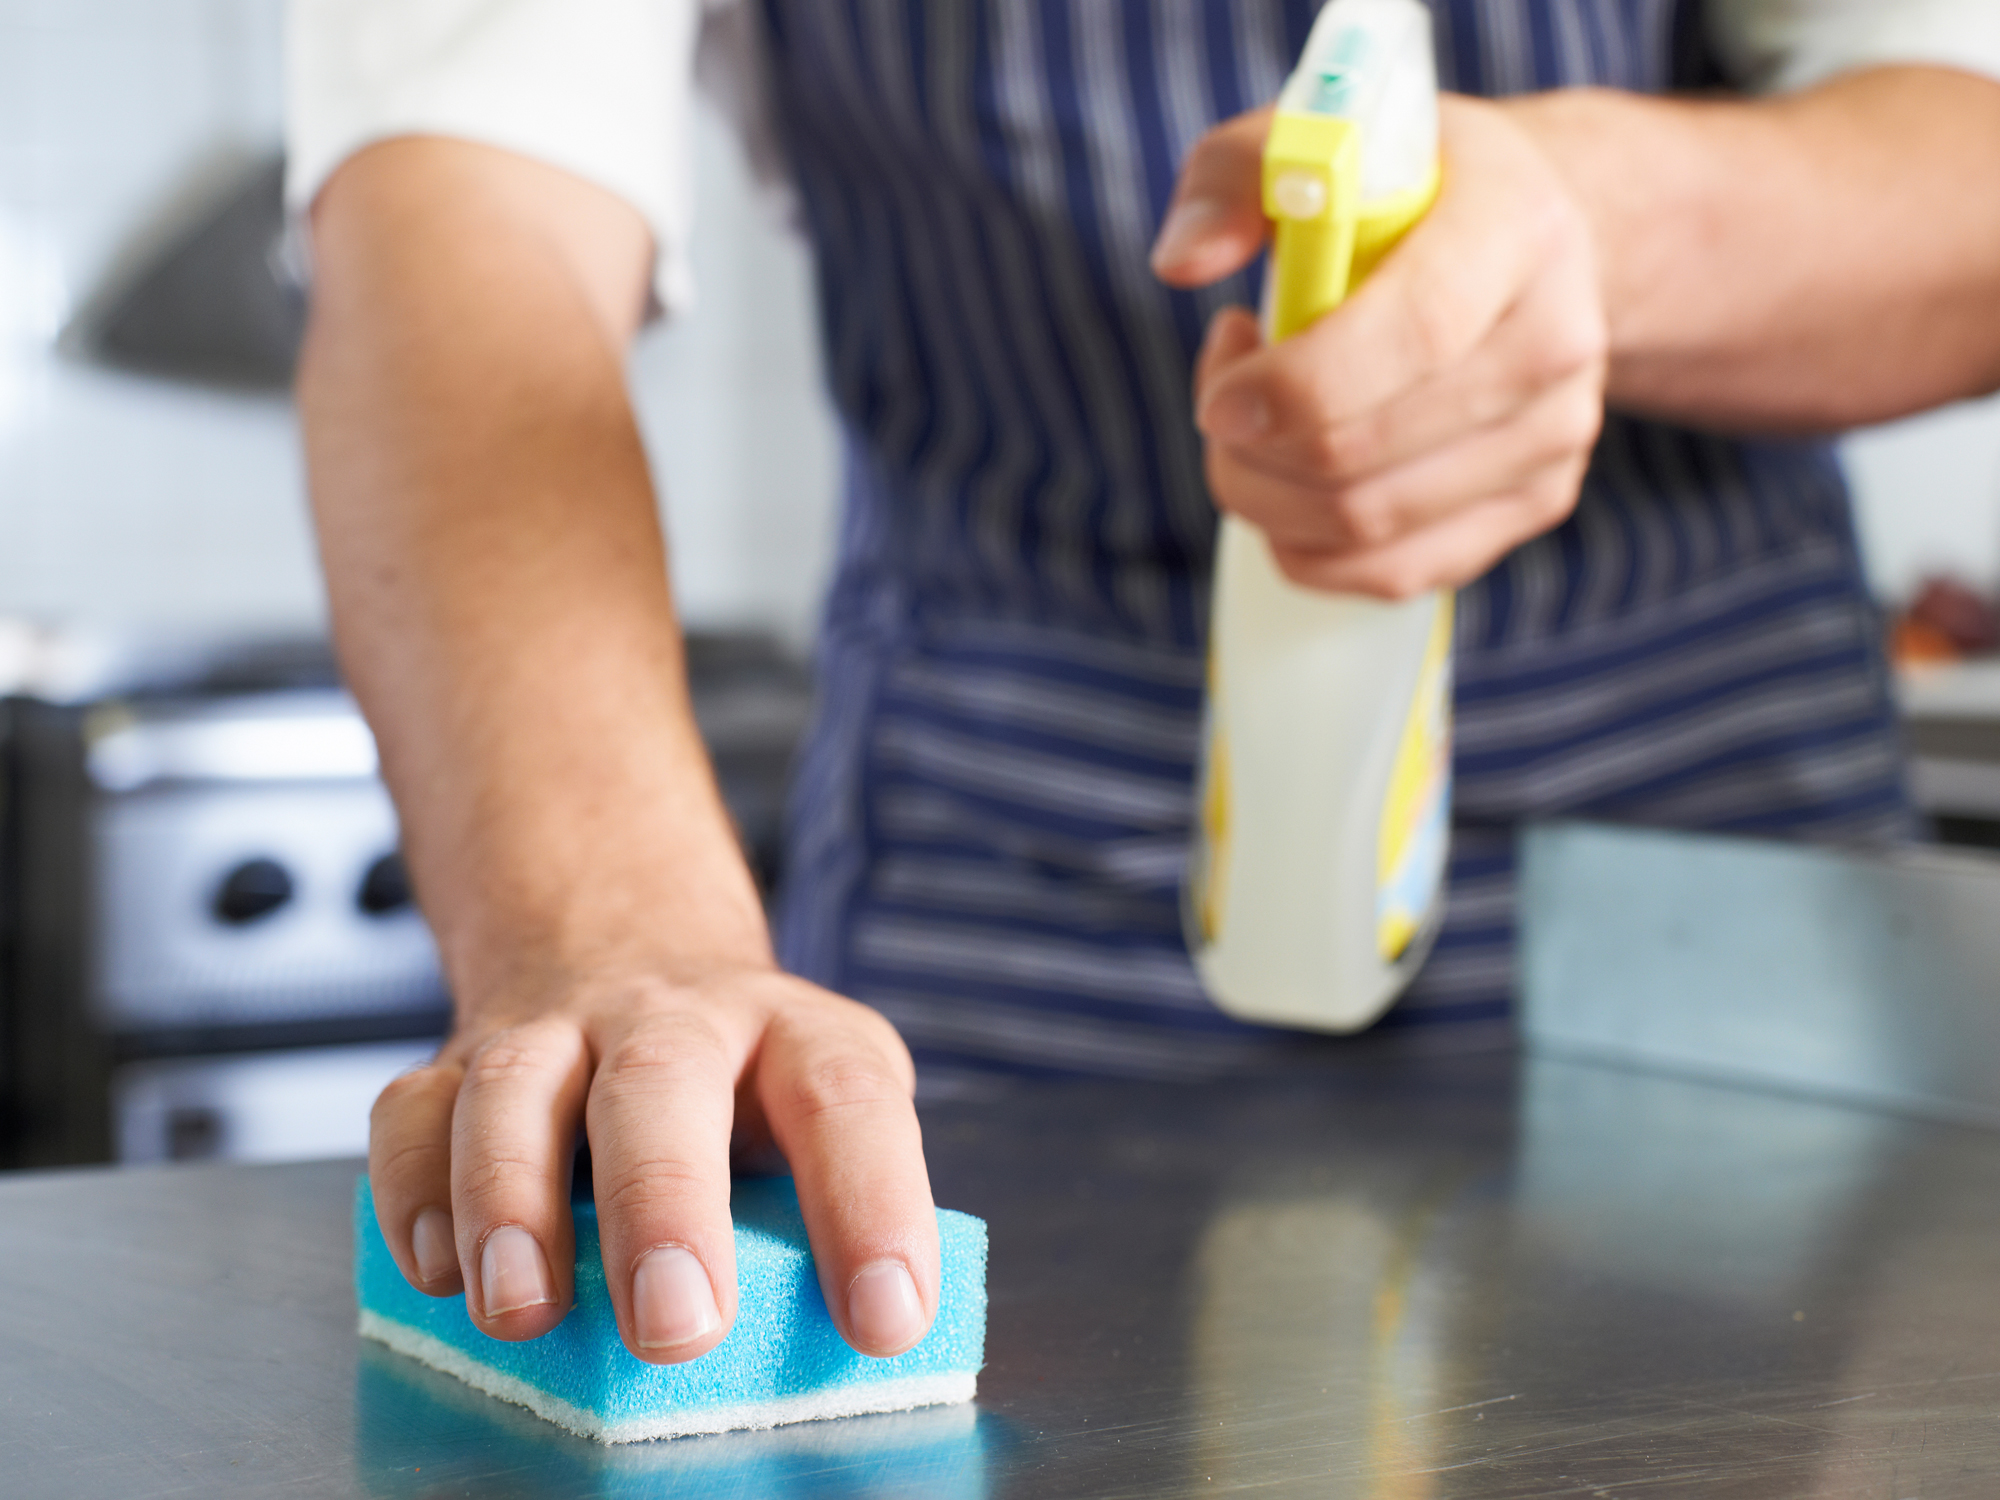 Keep your kitchen germ-free without destroying the planet or your health